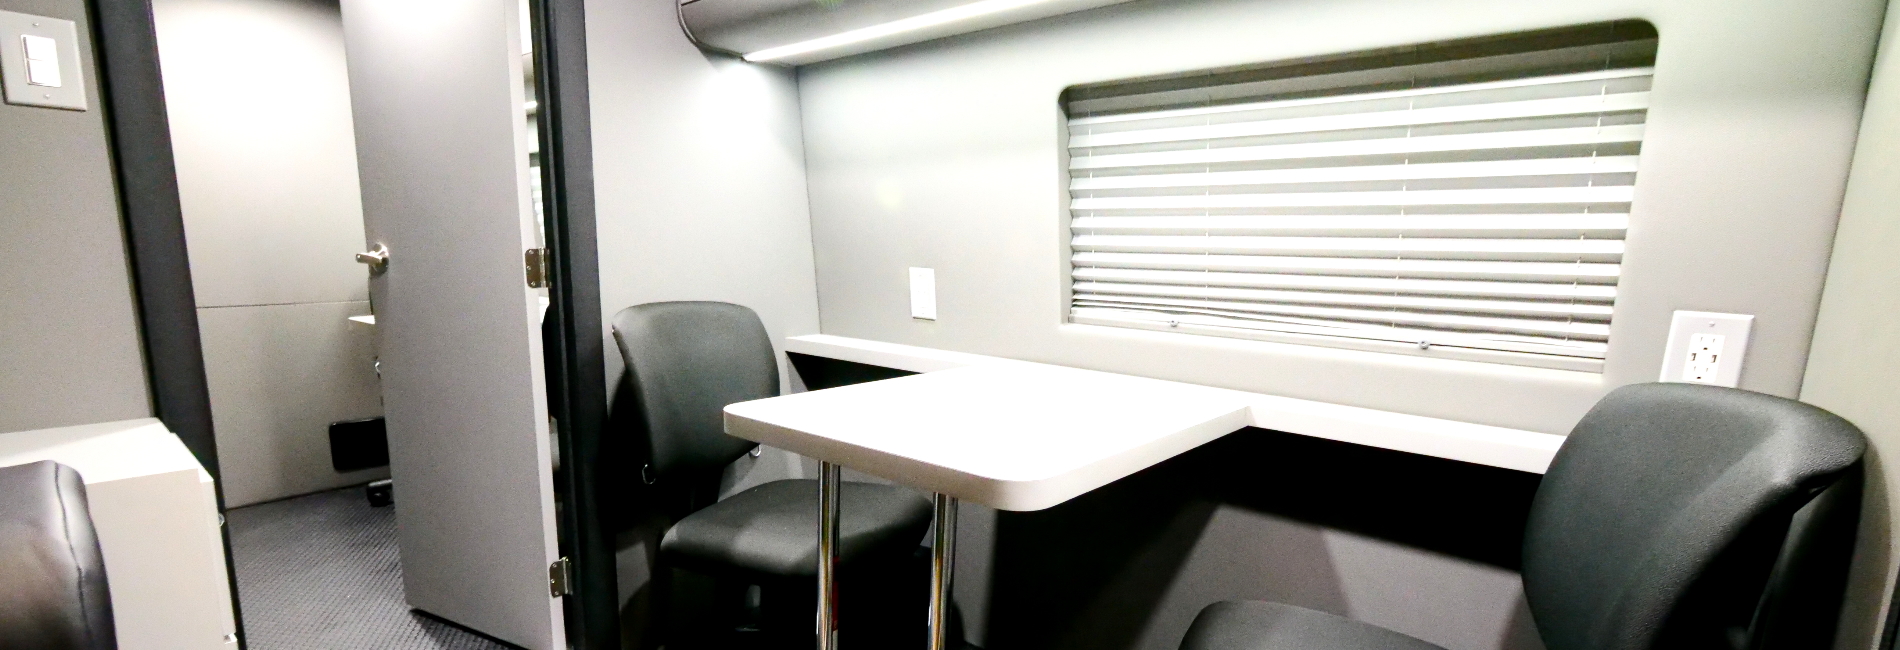 Dual configuration mobile office featuring a partition door, workstations desks, storage cabinets, and much more!